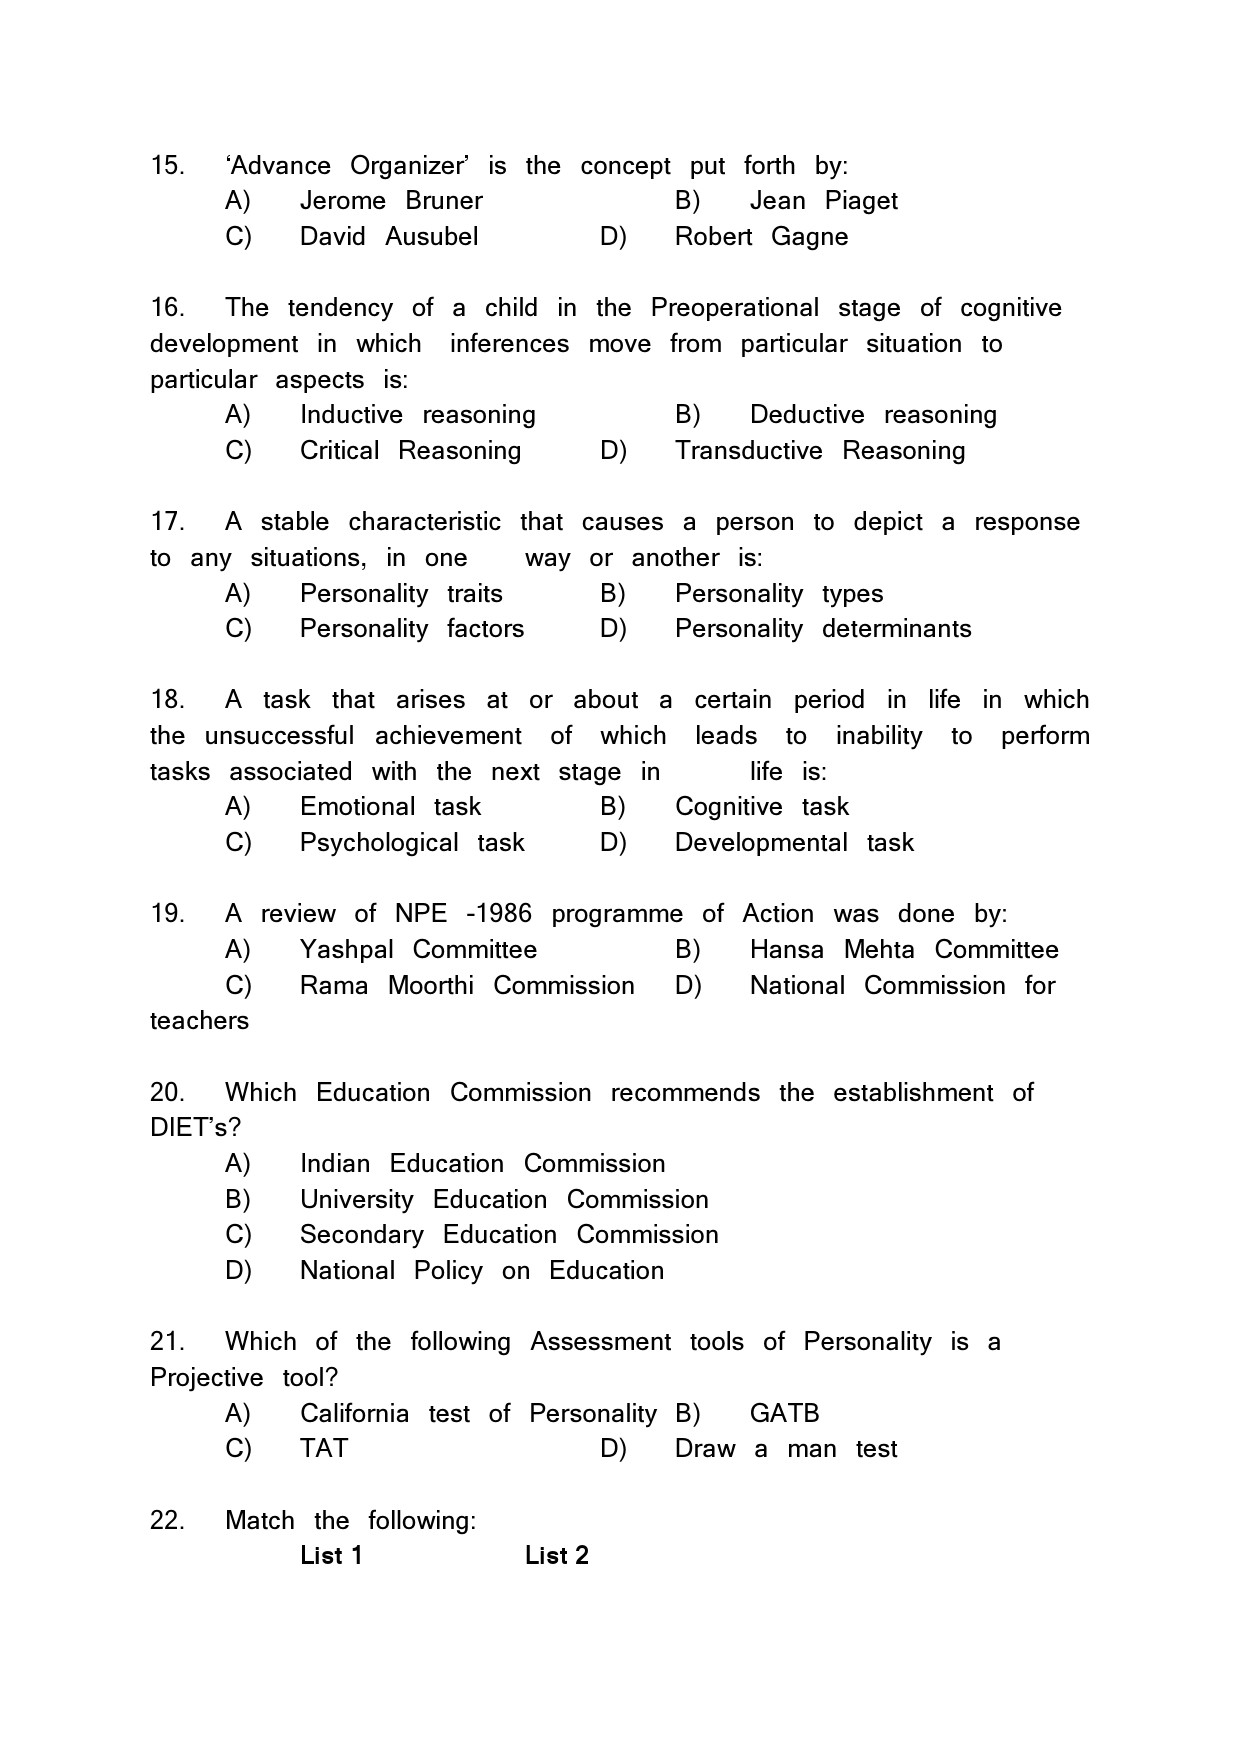 Kerala SET General Knowledge Exam Question Paper February 2020 3